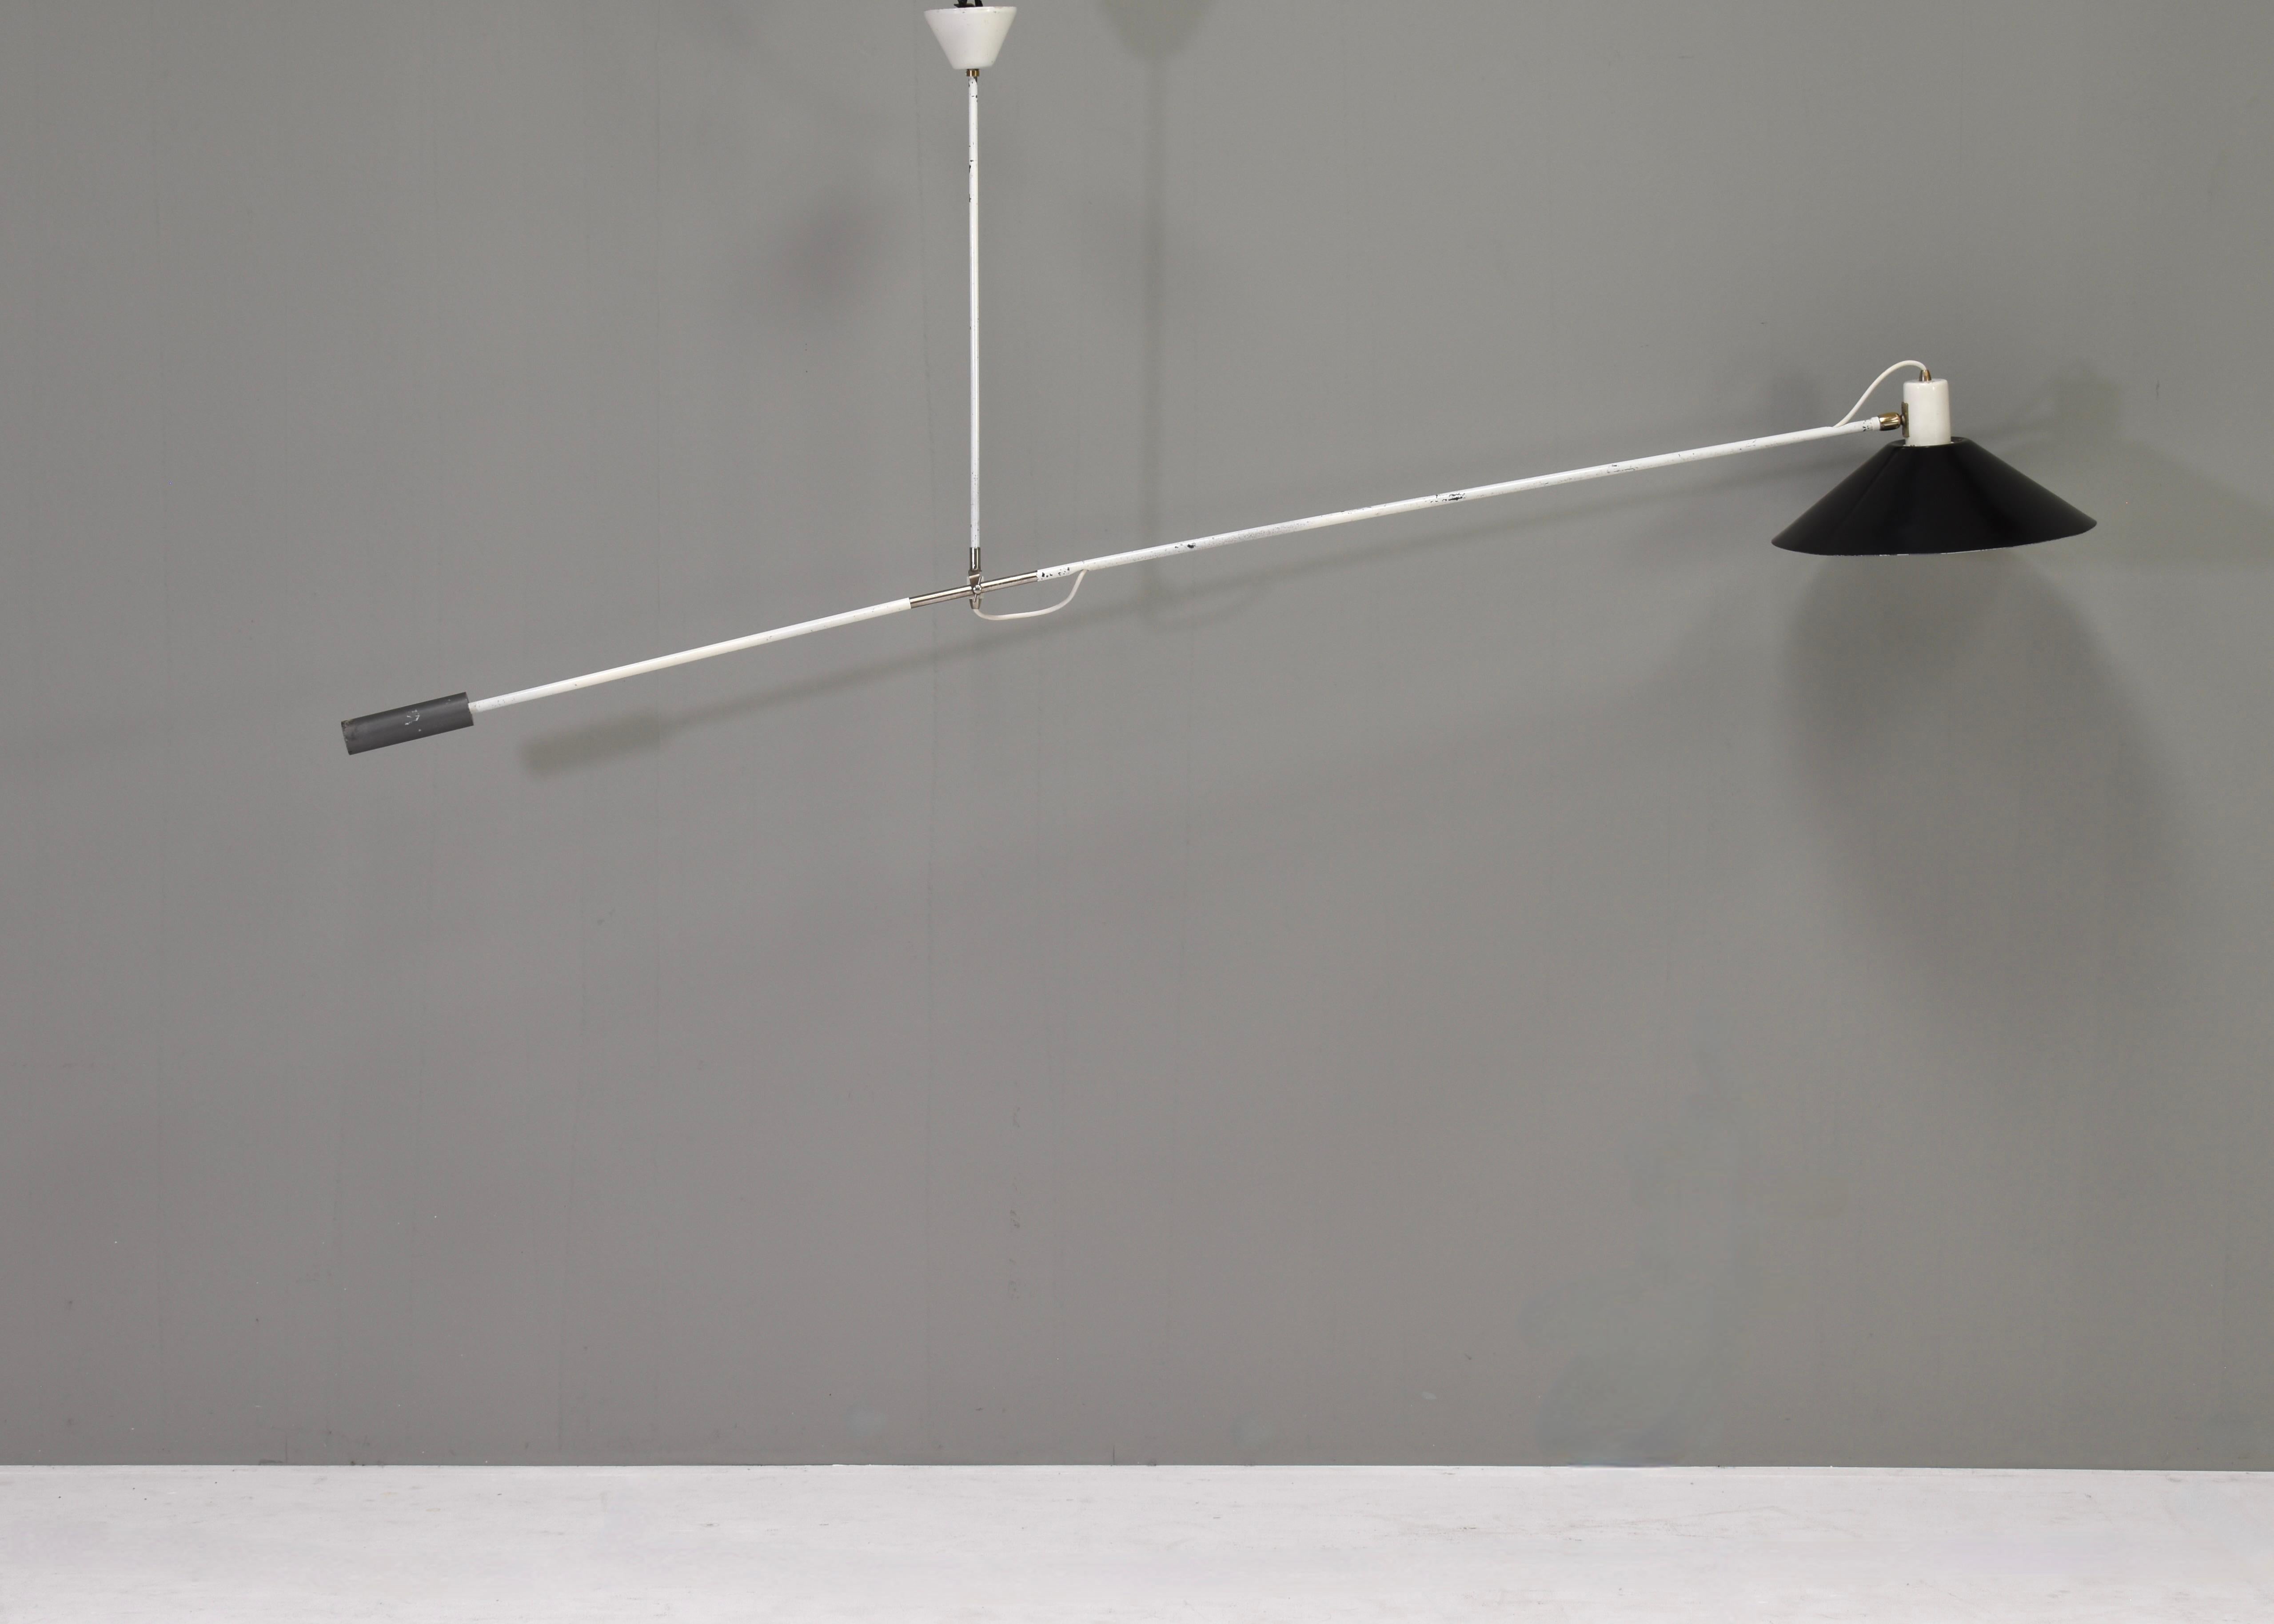 1st edition sculptural counter balance ceiling lamp designed by JJM Hoogervorst for Anvia Almelo, Holland, 1955.

This lamp is an early 1950s edition, not compared to the later one with plastic details this edition is fully made of metal. This